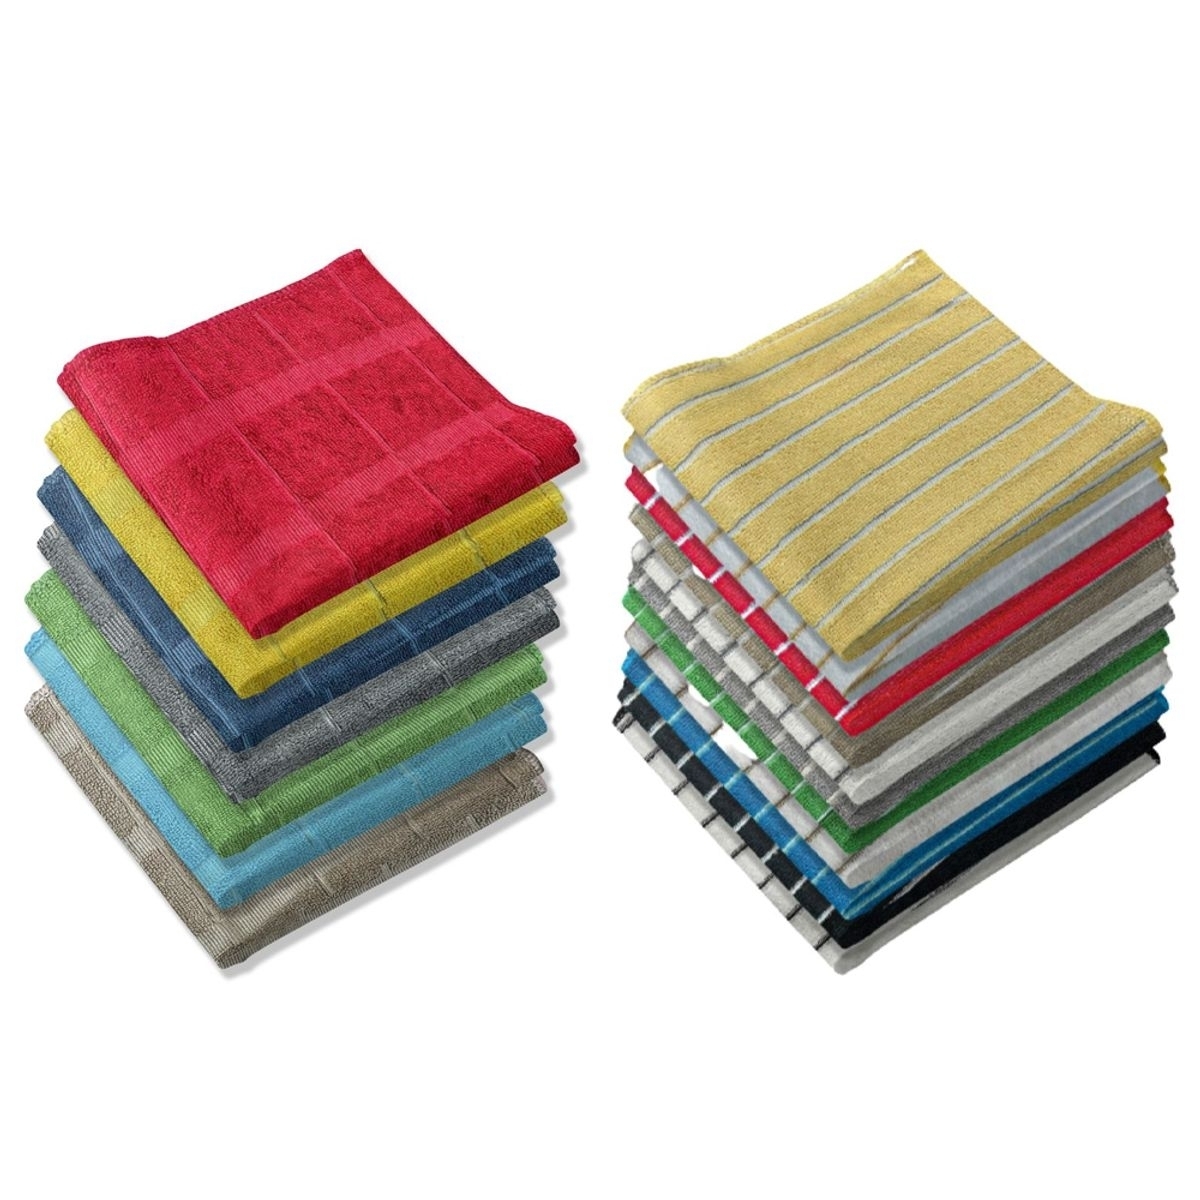 20-Pack: Ultra-Absorbent Multi Use Cleaning Super Soft Microfiber Dish Utility Rag Cloths - Striped